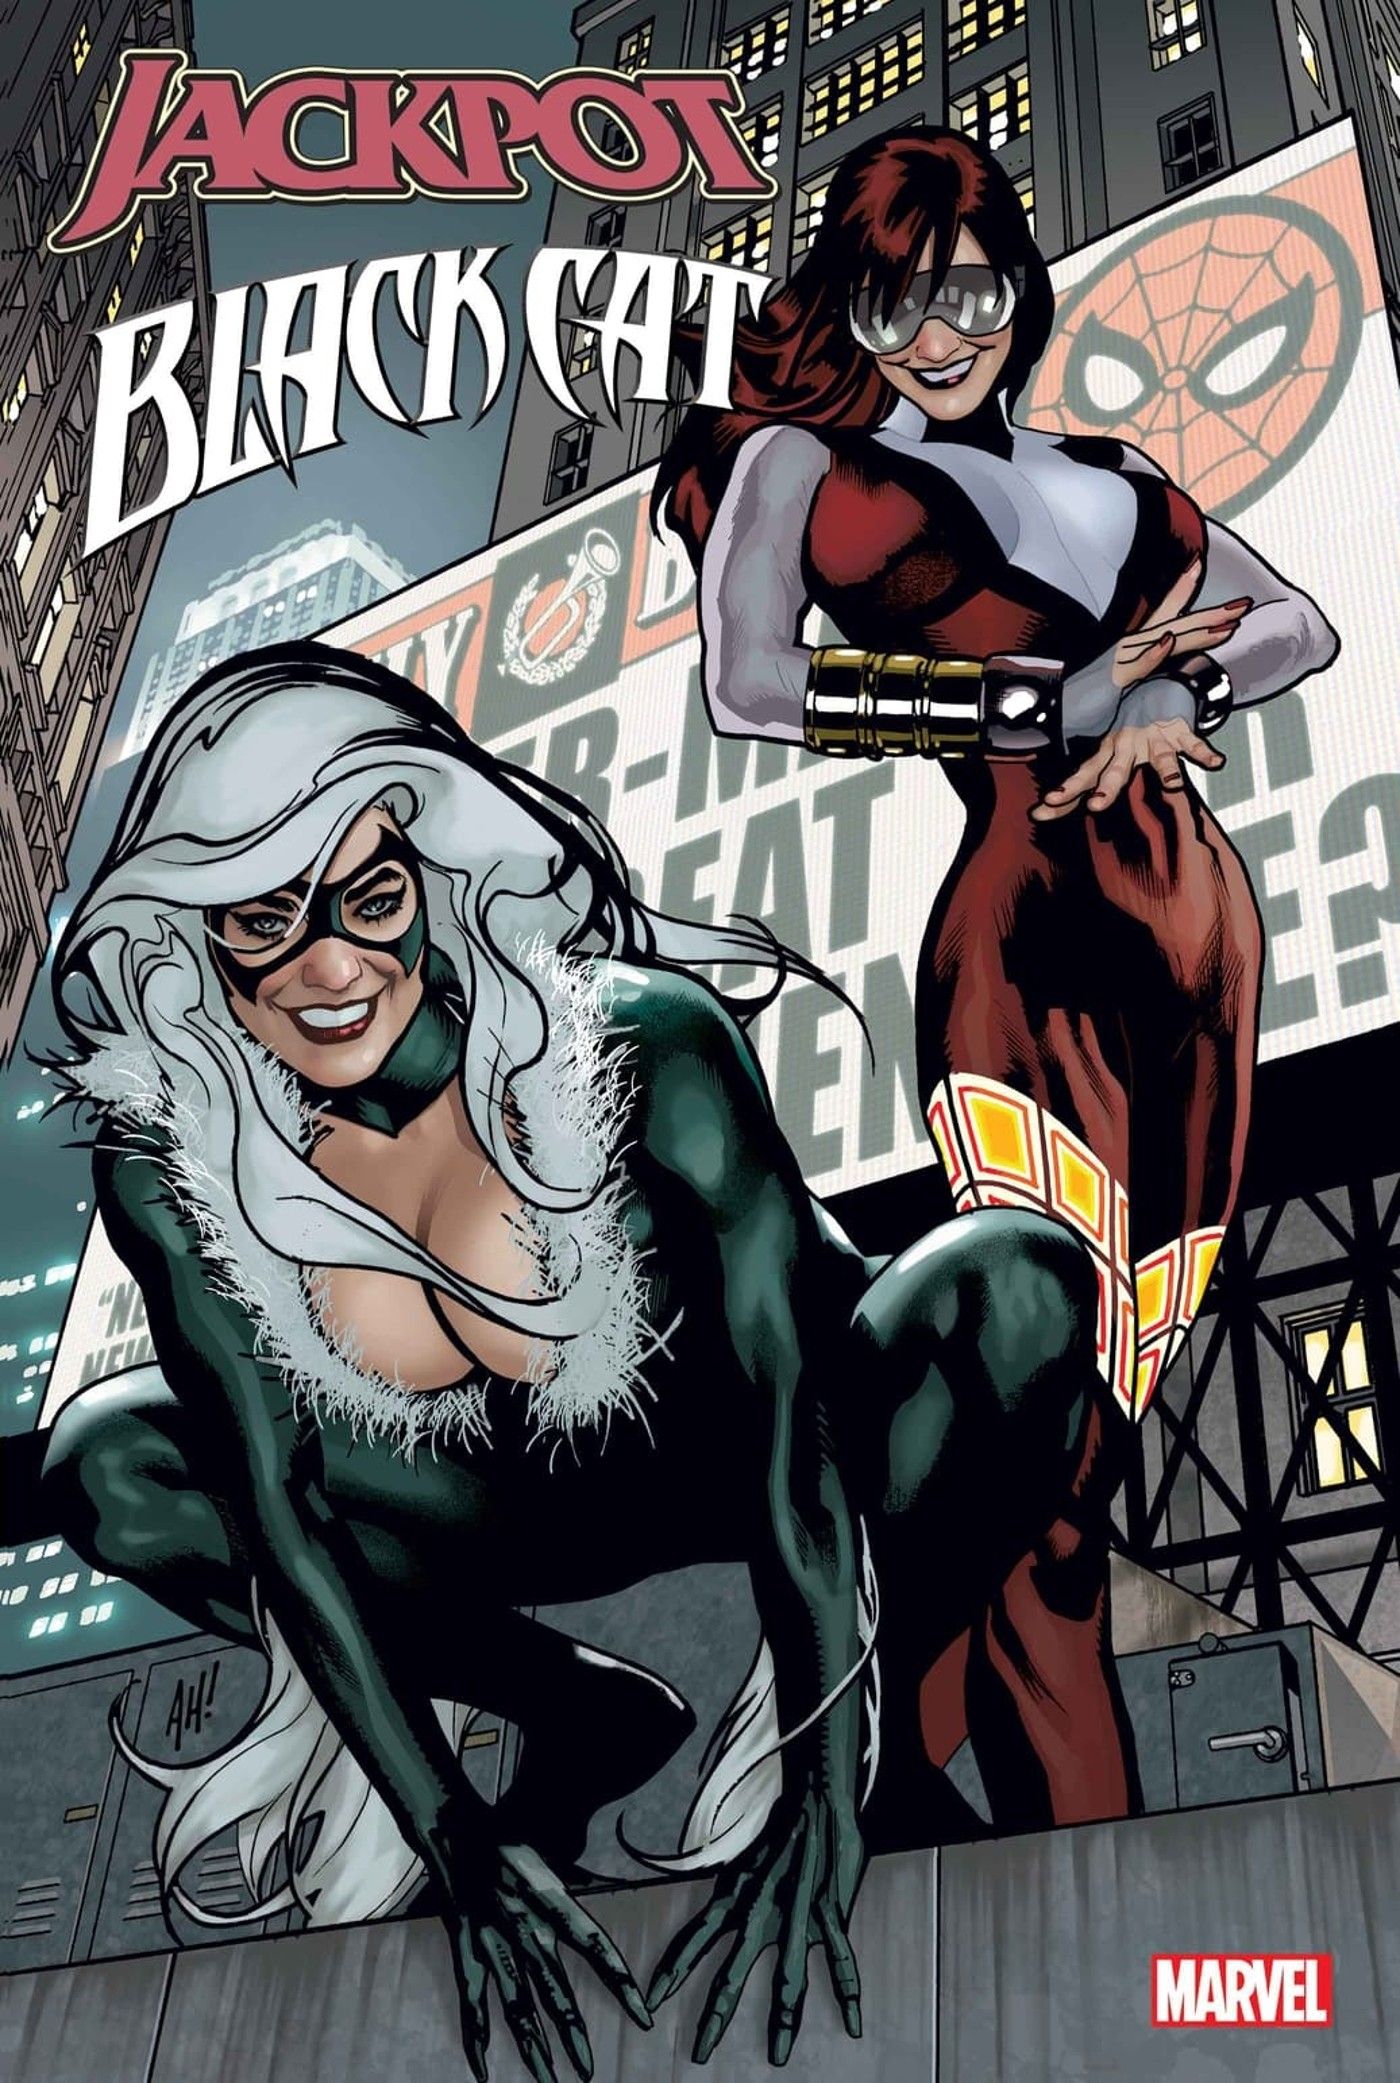 Spider-Man’s Exes Reunite as Marvel’s Best Dynamic Duo in JACKPOT & BLACK CAT